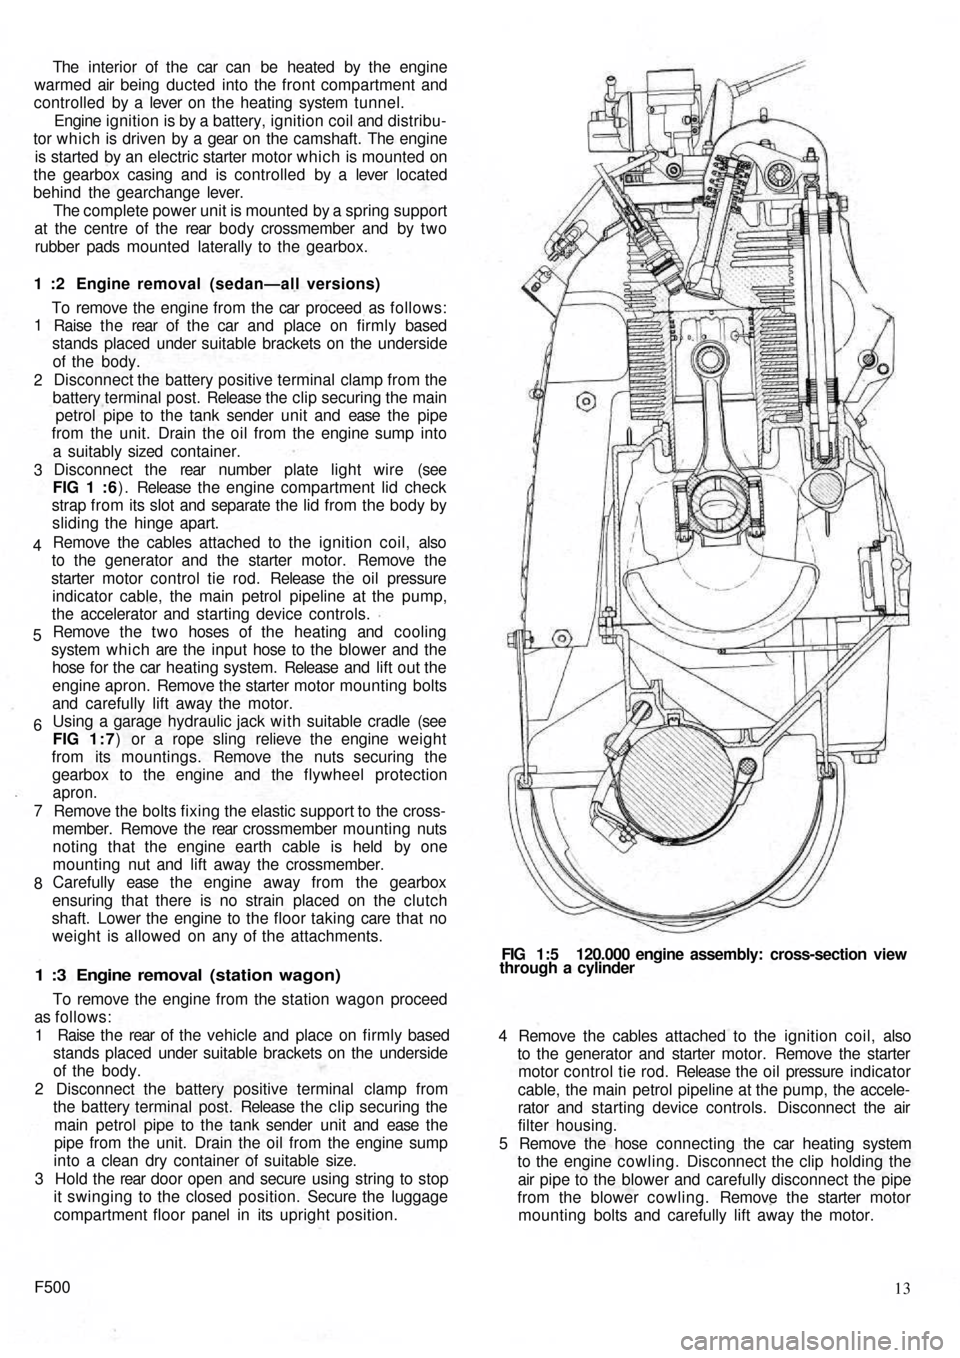 FIAT 500 1965 1.G Workshop Manual The  interior of the  car can  be heated by the engine
warmed air being ducted into the front compartment and
controlled  by a  lever on the heating system tunnel.
Engine ignition is by a battery, ign